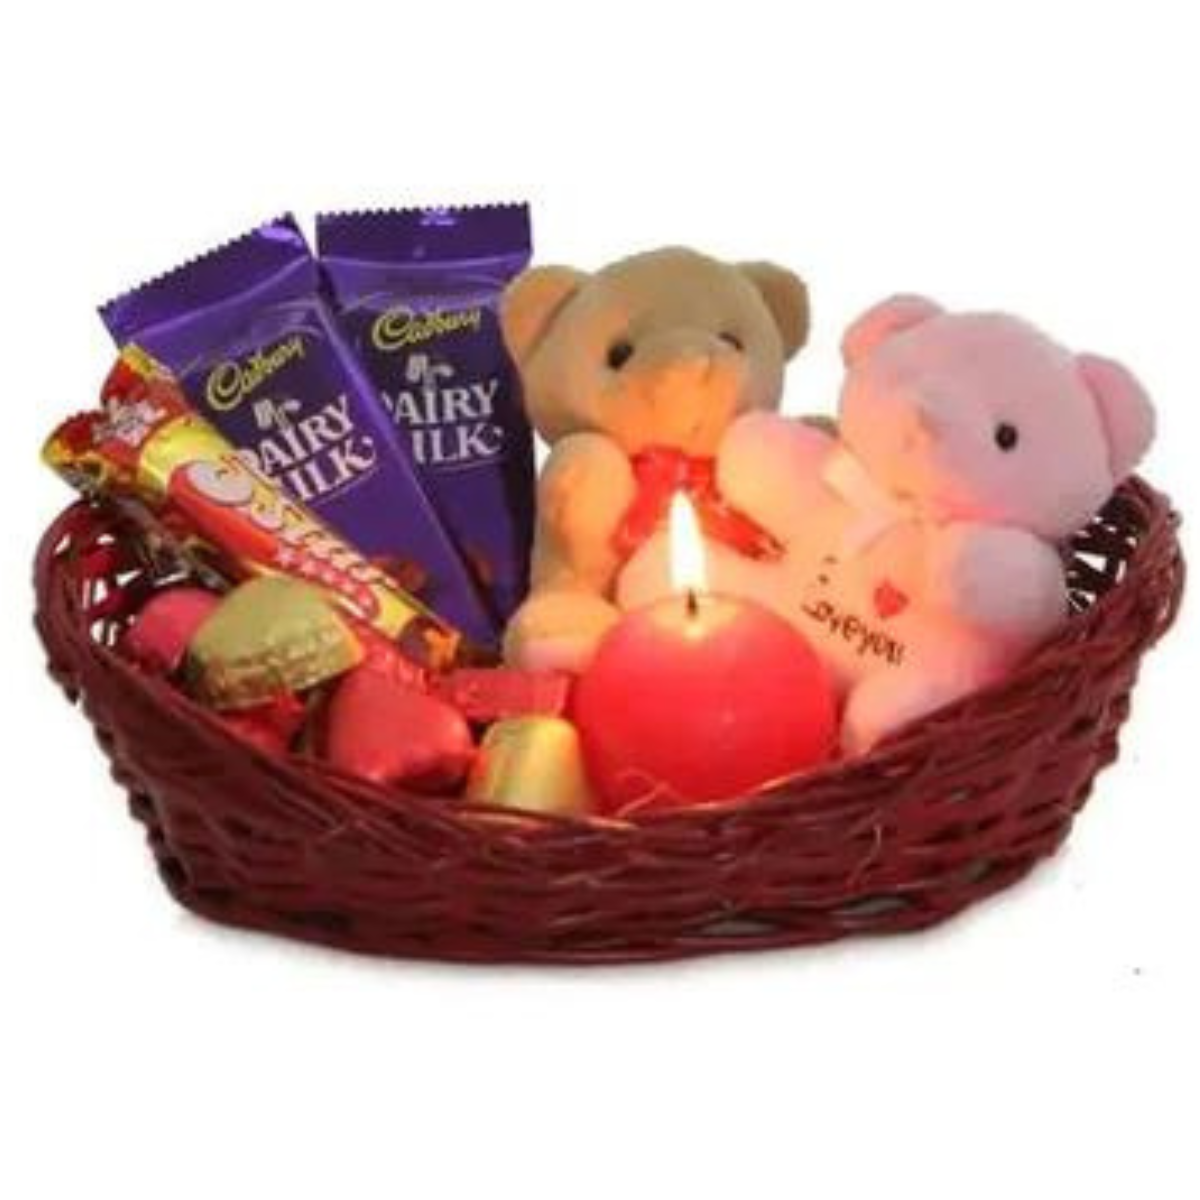 Teddies with Chocolates & Candles